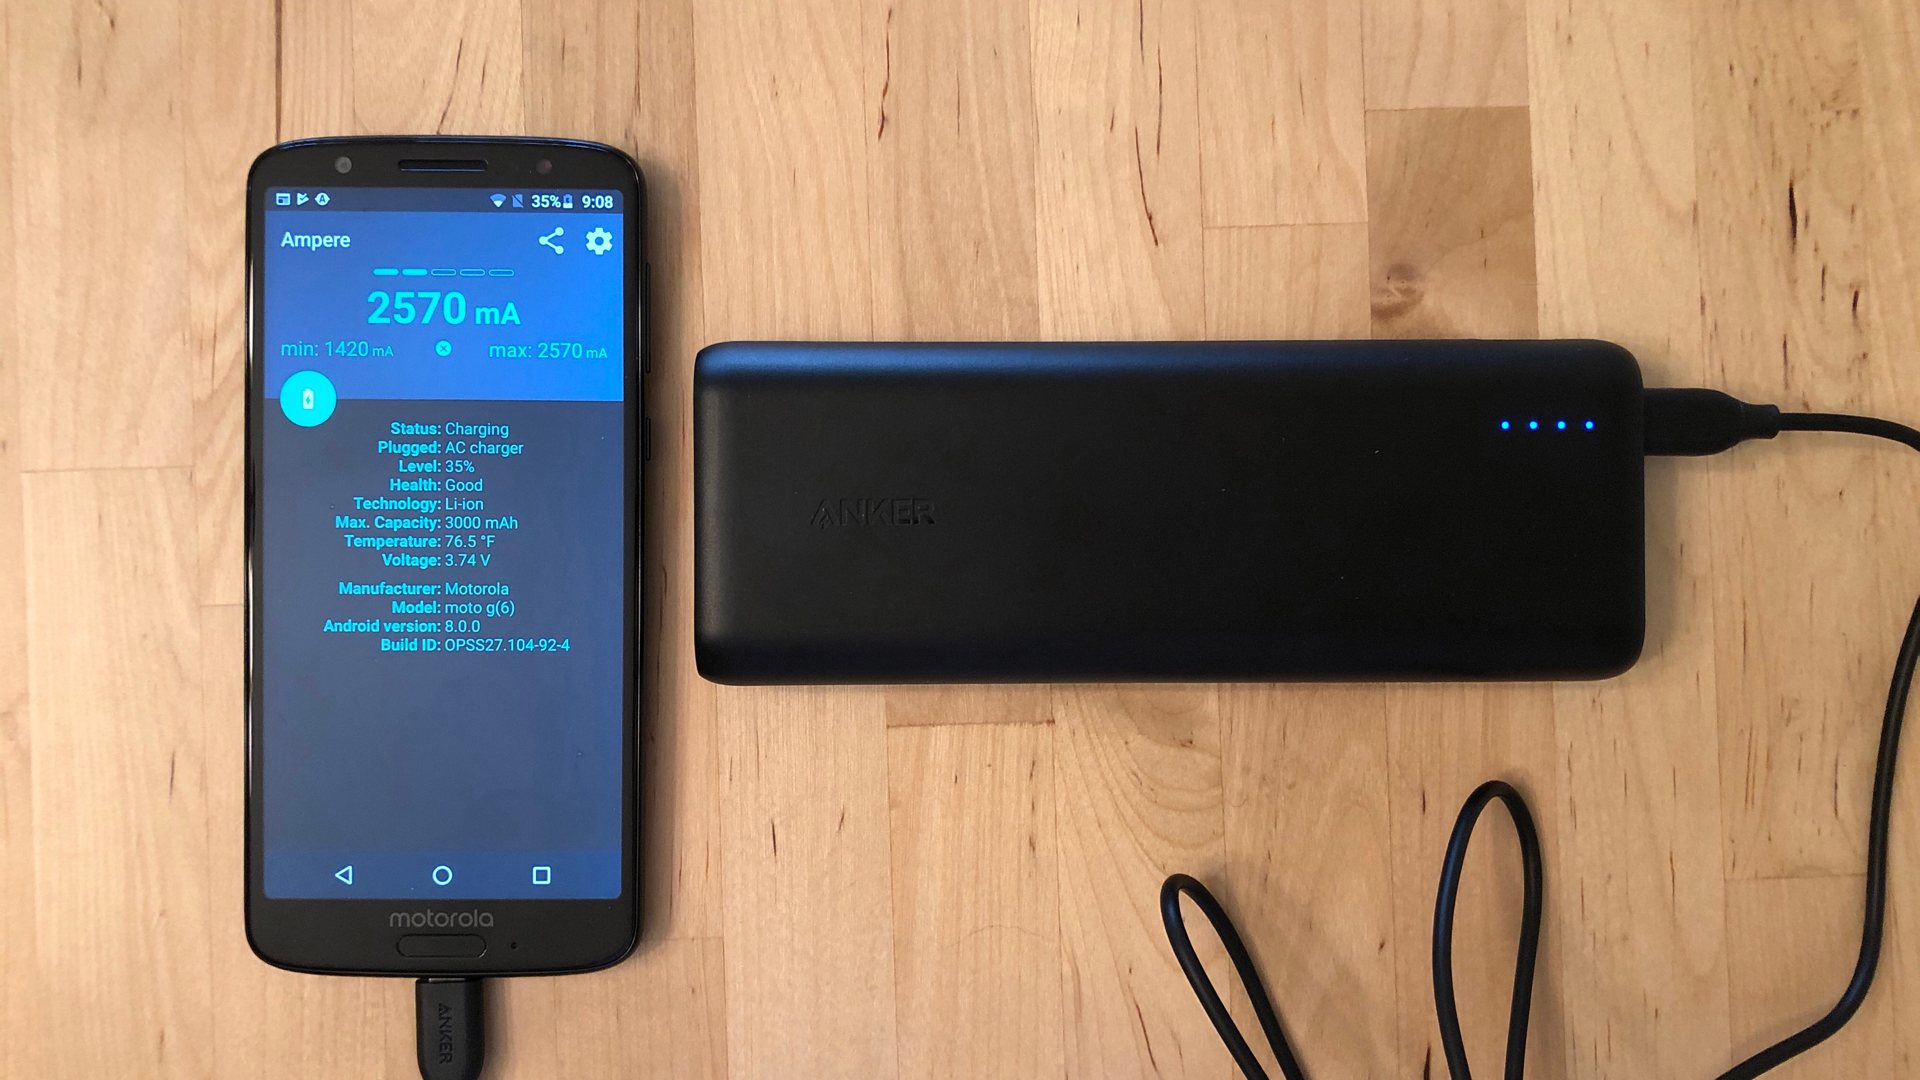 Anker PowerCore Speed 20000 PD Review - Chargers